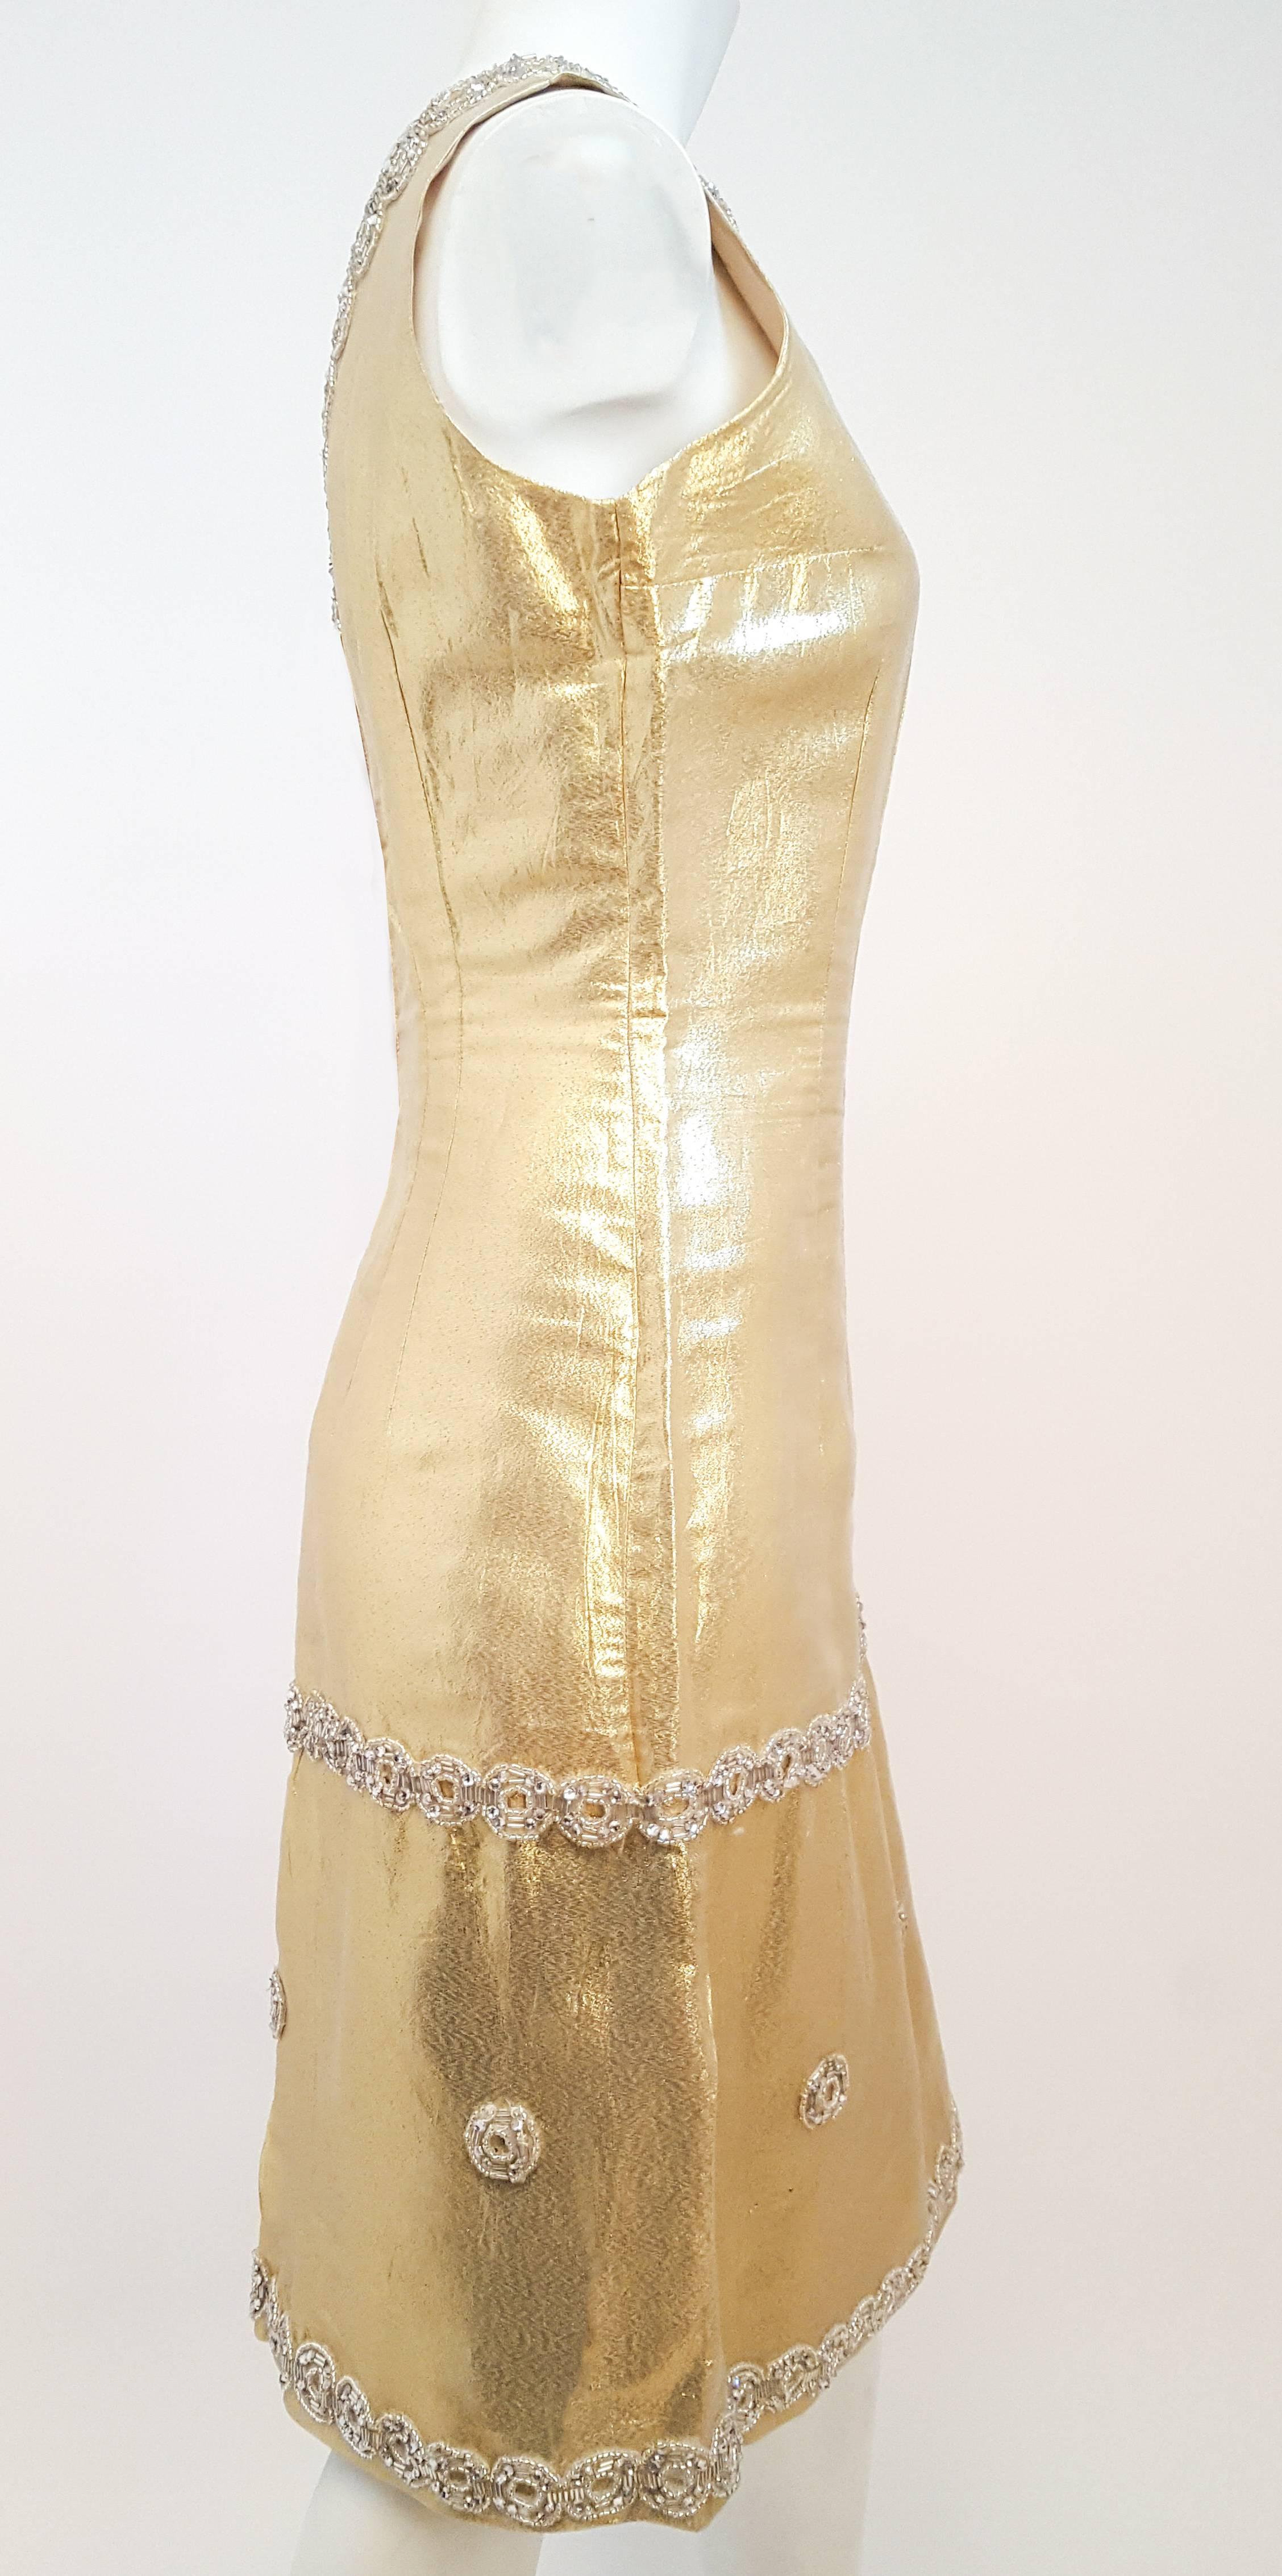 1960s Gold Lamé Cocktail Dress w/ Silver Beading. Glass bead and rhinestone embellishment. Fully lined and faced. Back zipper closure.